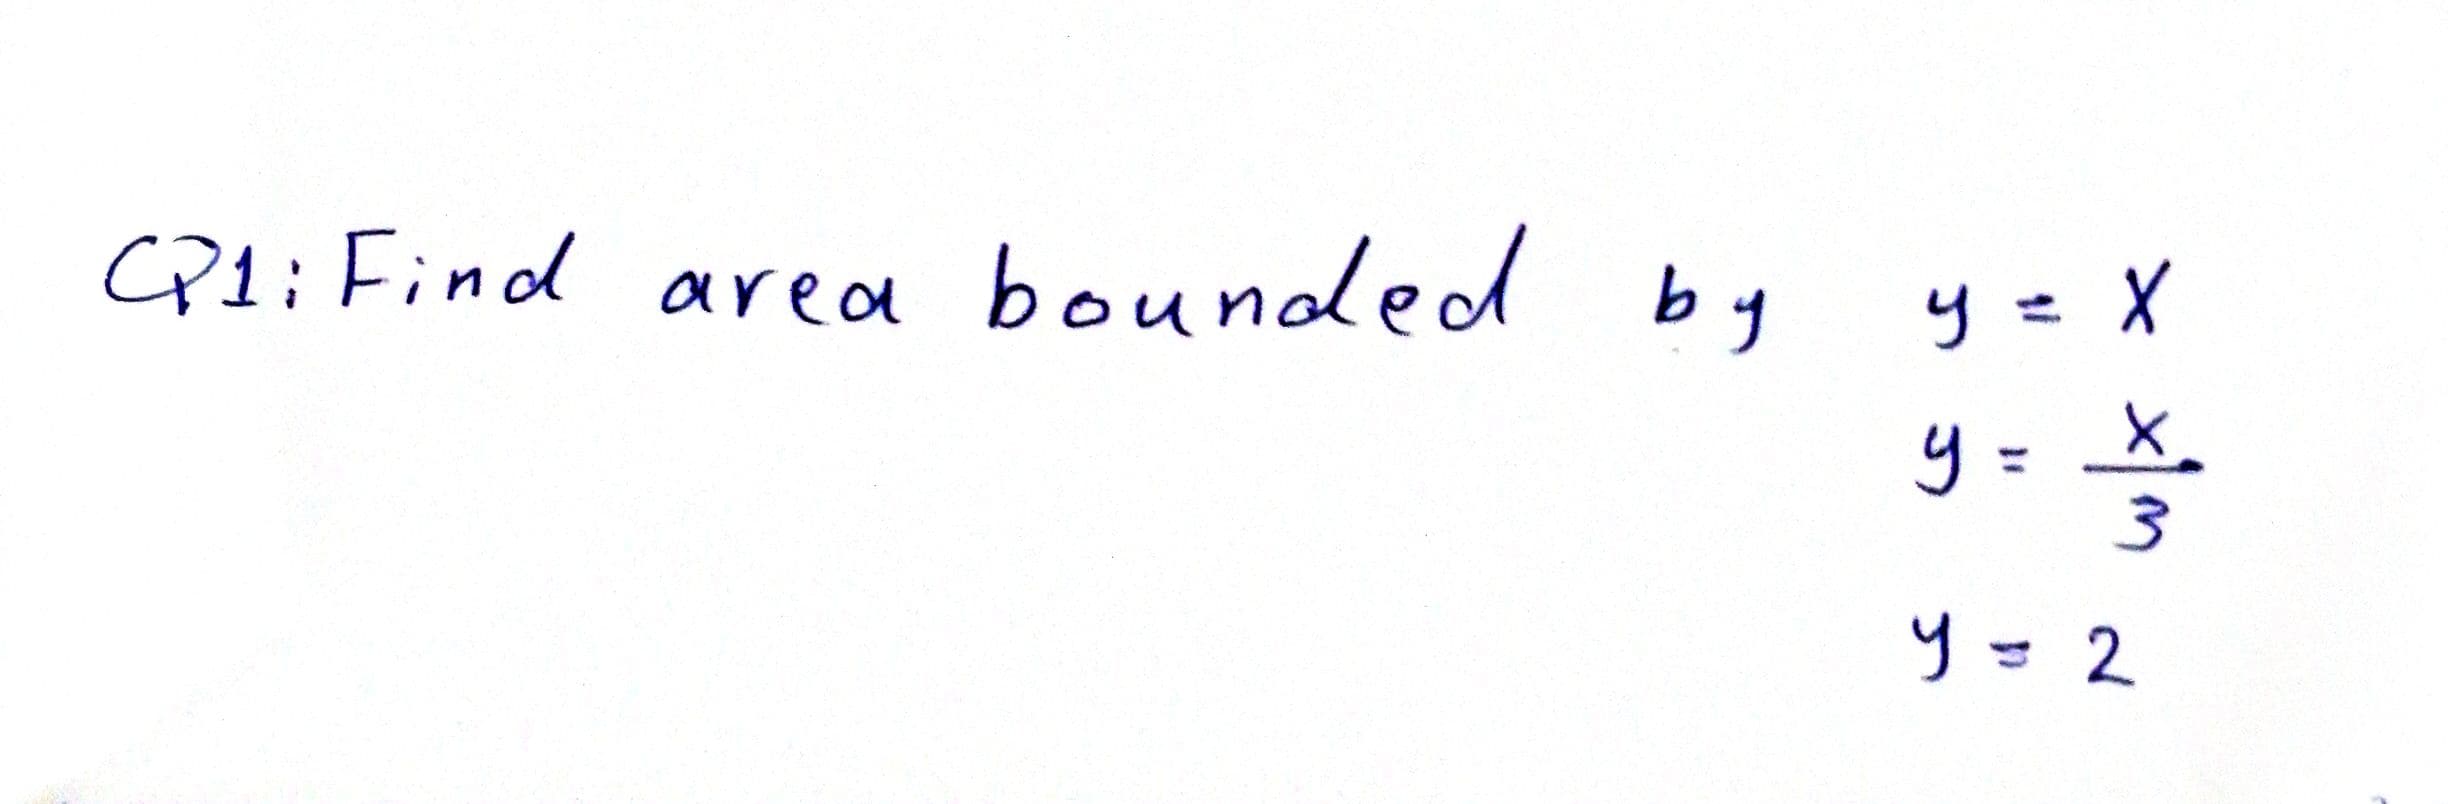 CP1: Find
ared bounded
b,
y = 2
